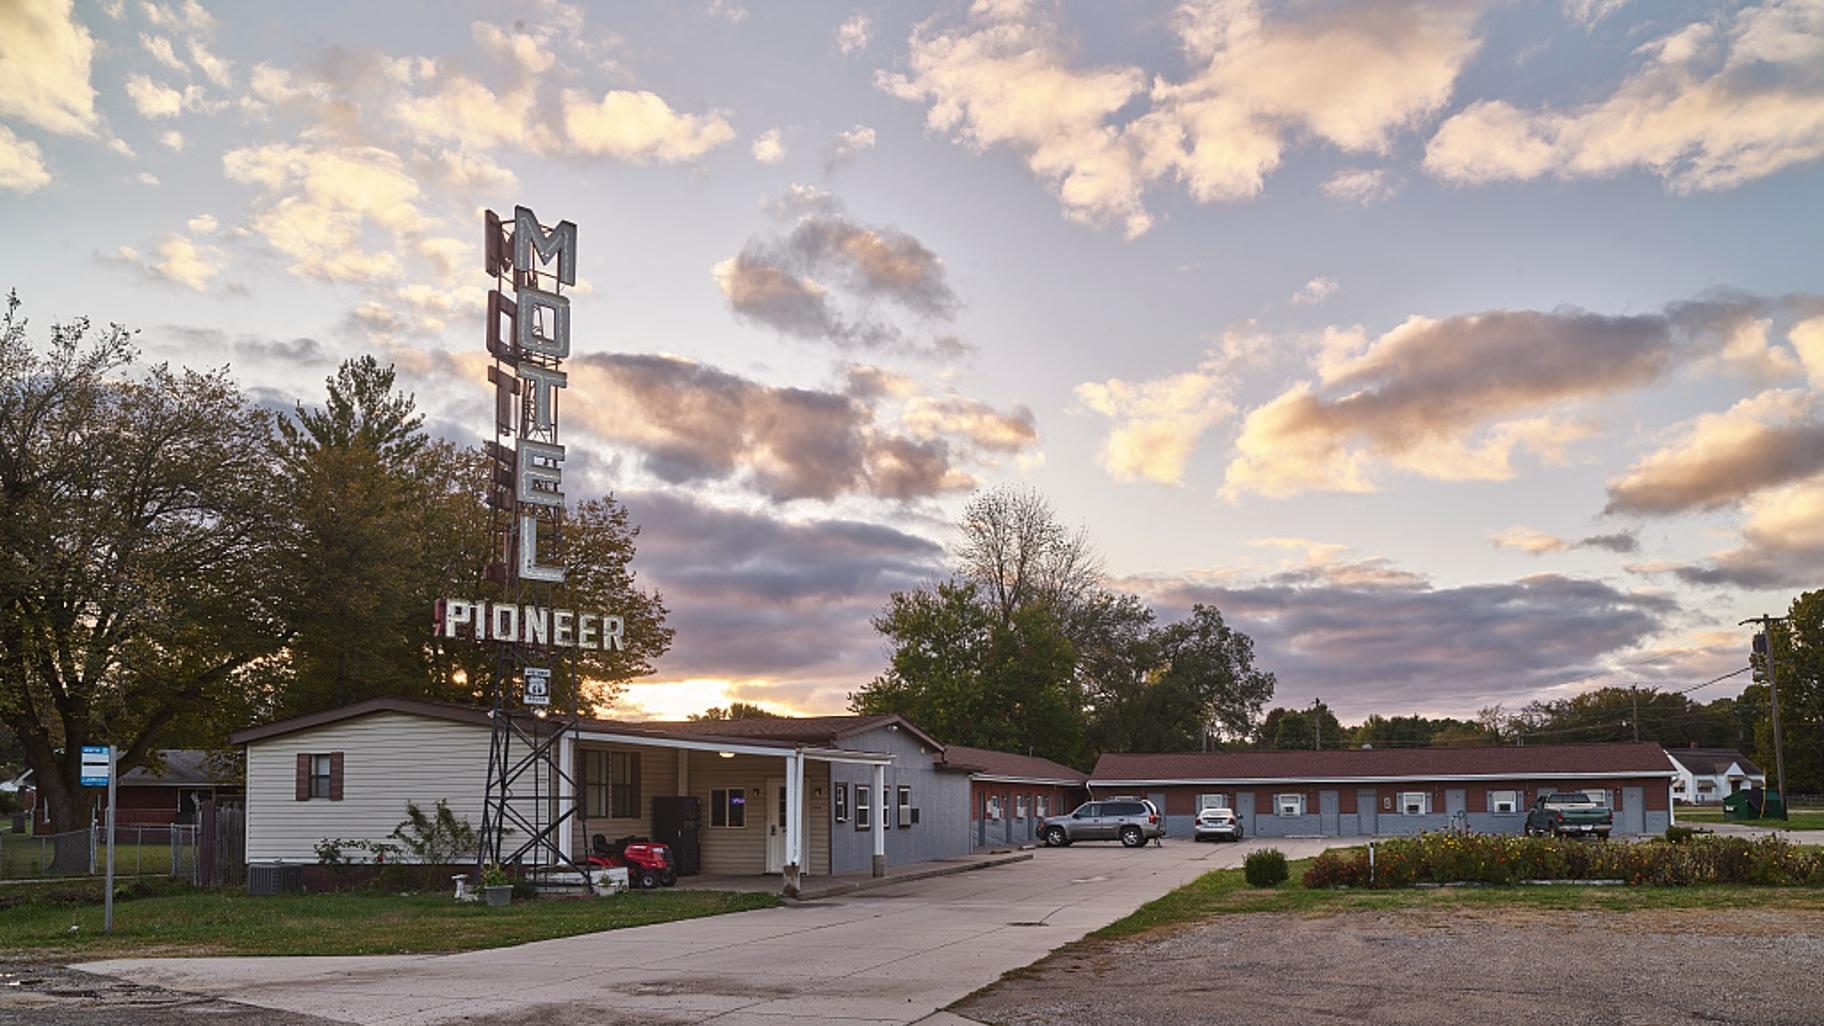 A classic 1940s-vintage Pioneer Motel (and sign) along the old “Mother Road” — U.S. Route 66 from Chicago to California — still stands and invites guests just north of Springfield, Illinois. (Carol M. Highsmith)